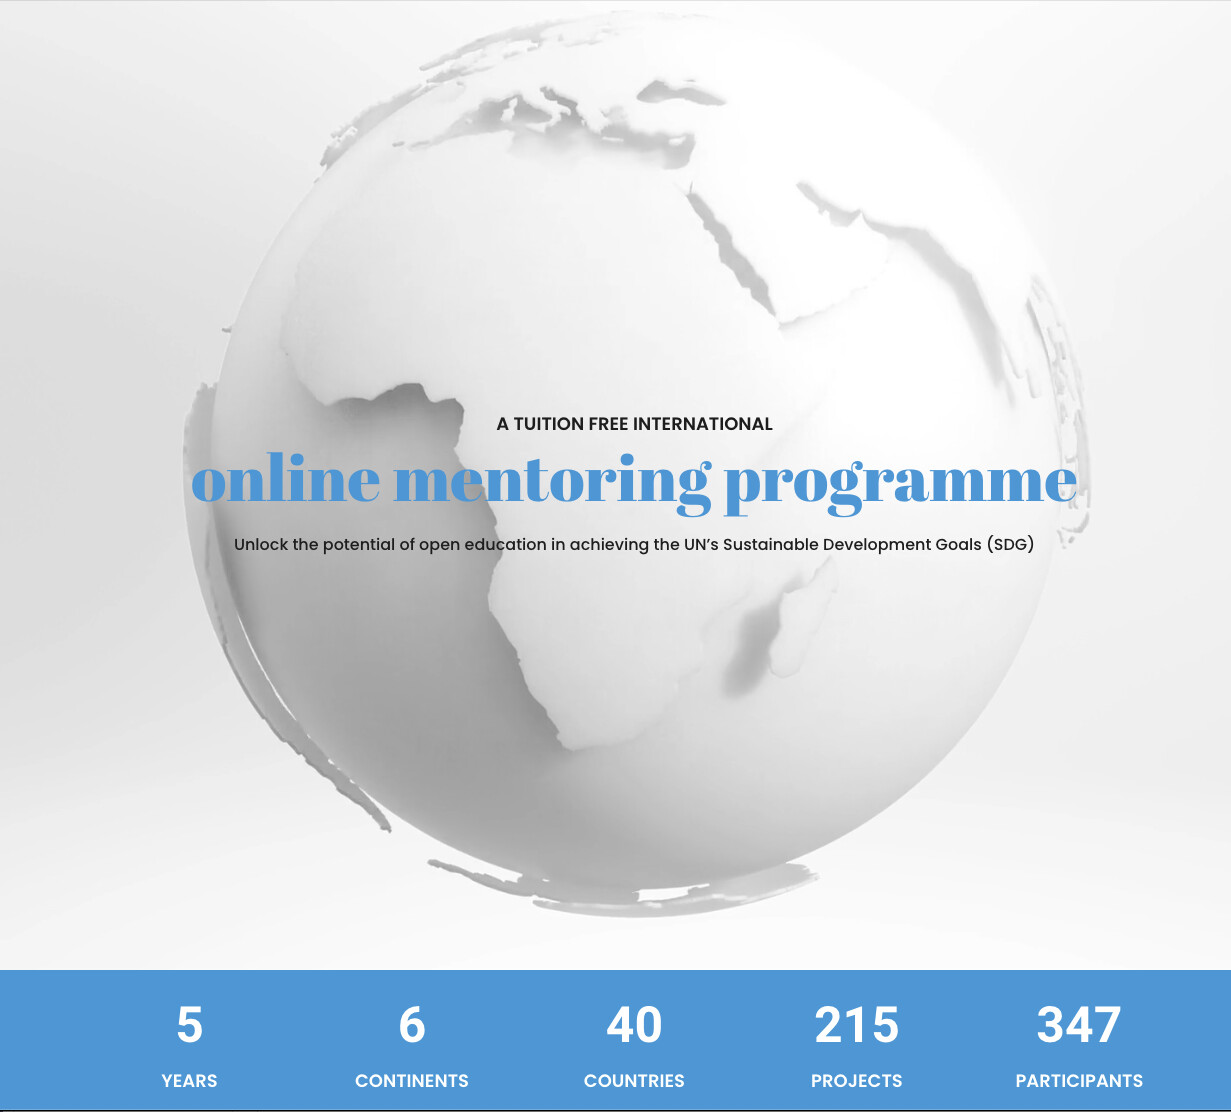 Text over a graphic representation of the earth - A tuition free international online mentoring programme --